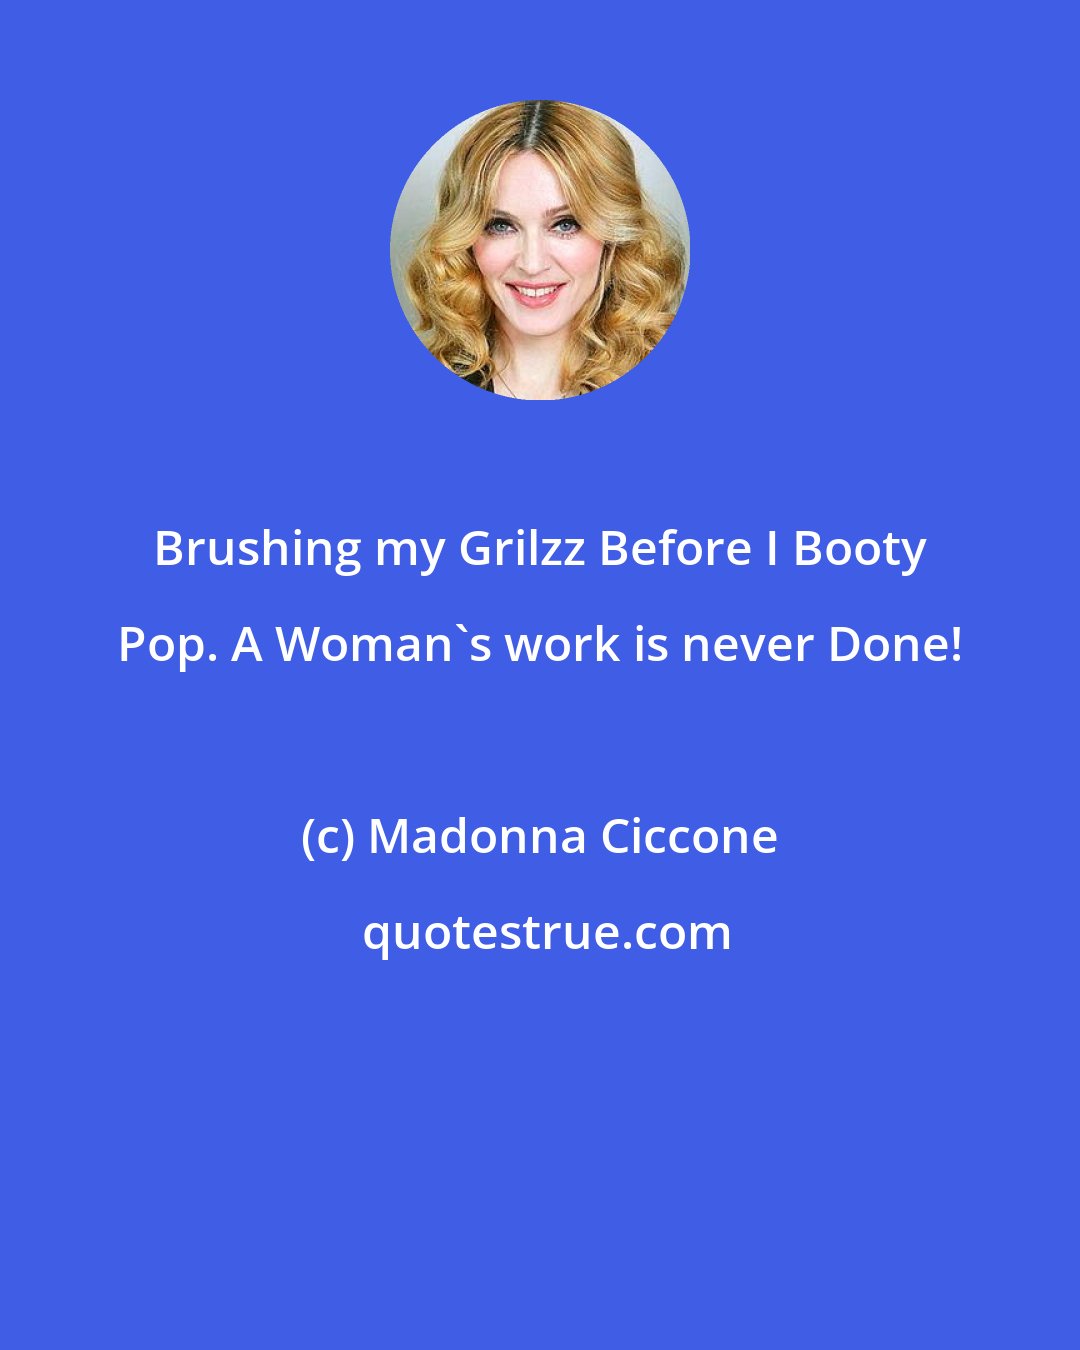 Madonna Ciccone: Brushing my Grilzz Before I Booty Pop. A Woman's work is never Done!